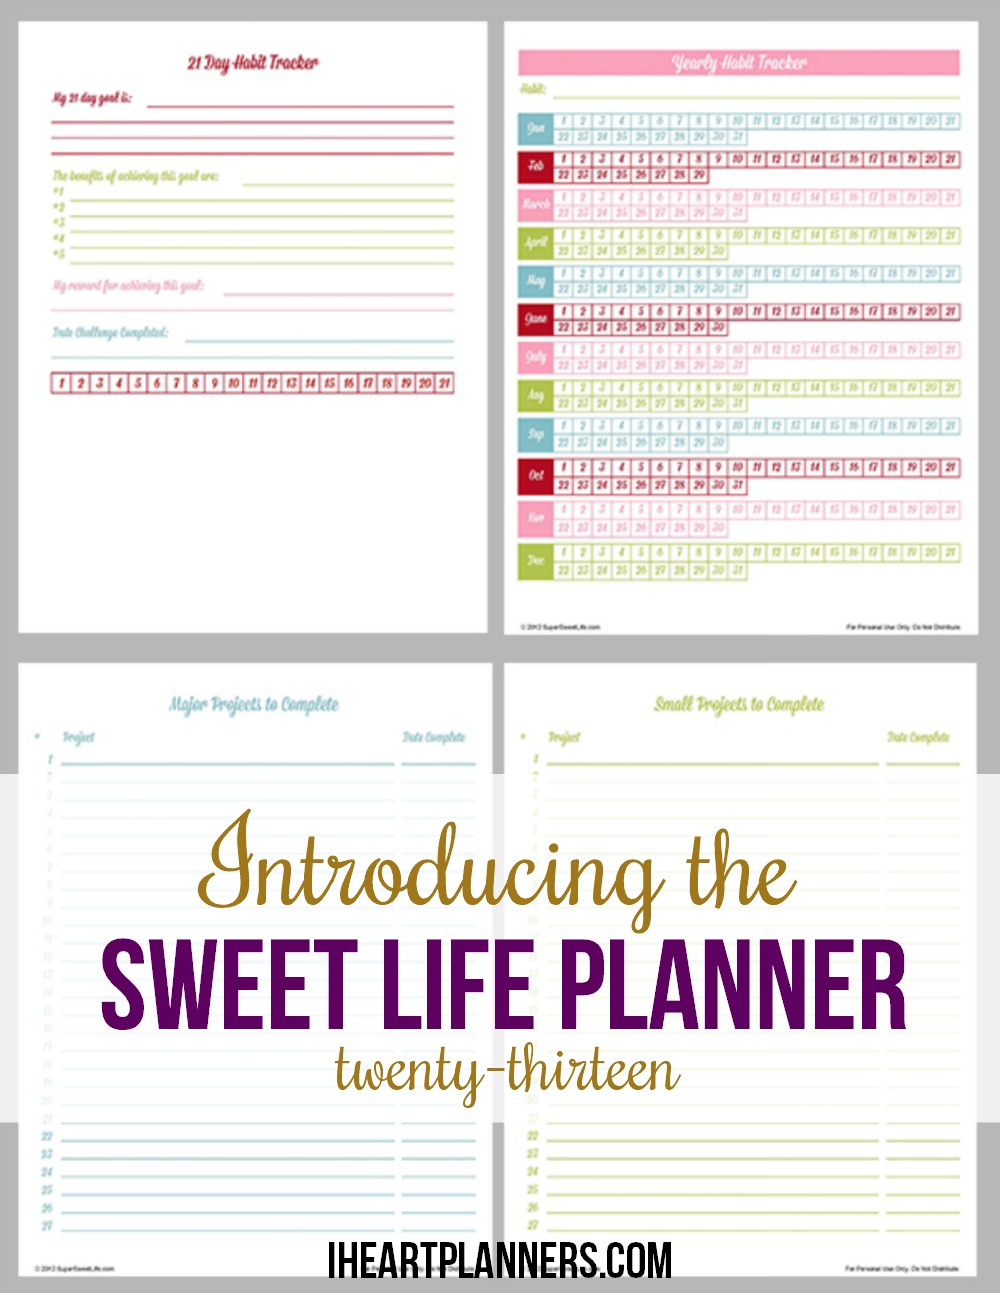 Introducing the Sweet Life Planner 2013 - a great way to stay organized! Use this planner and calendar to organize your home, family, business, and anything else that overwhelms you!